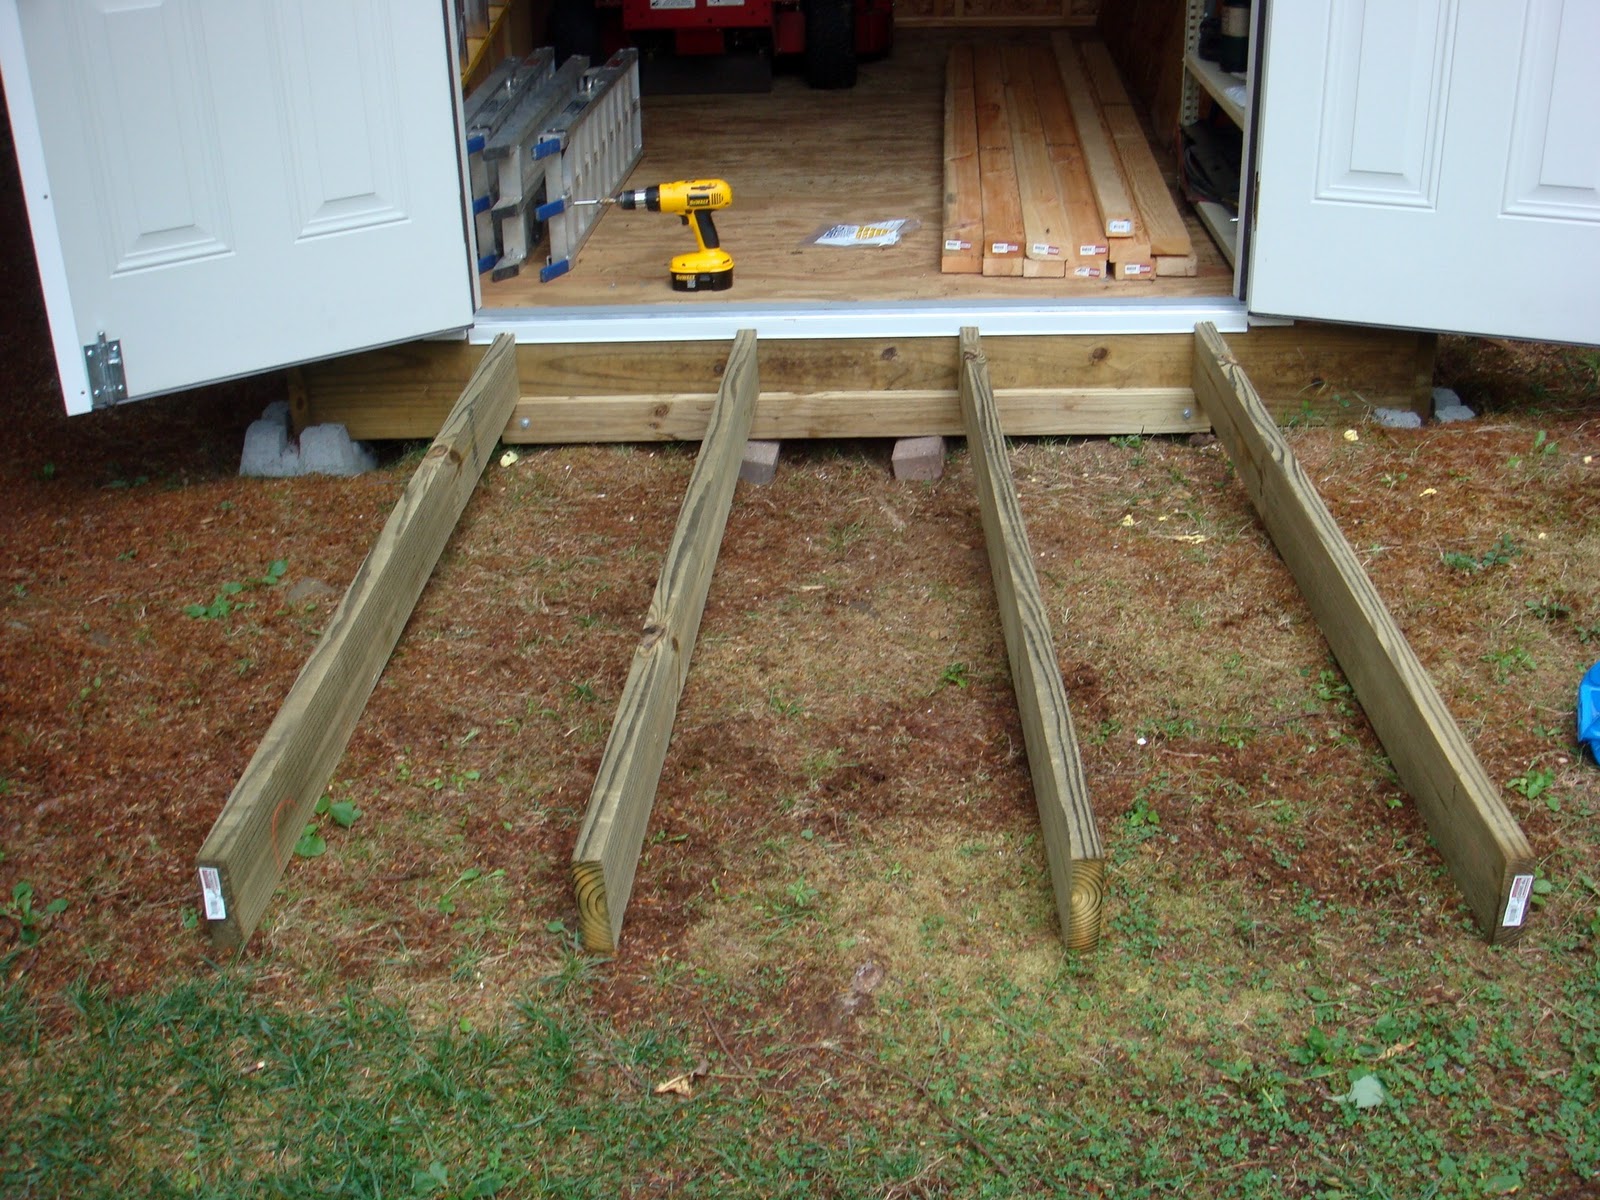 Lawn Mower Ramp for Shed